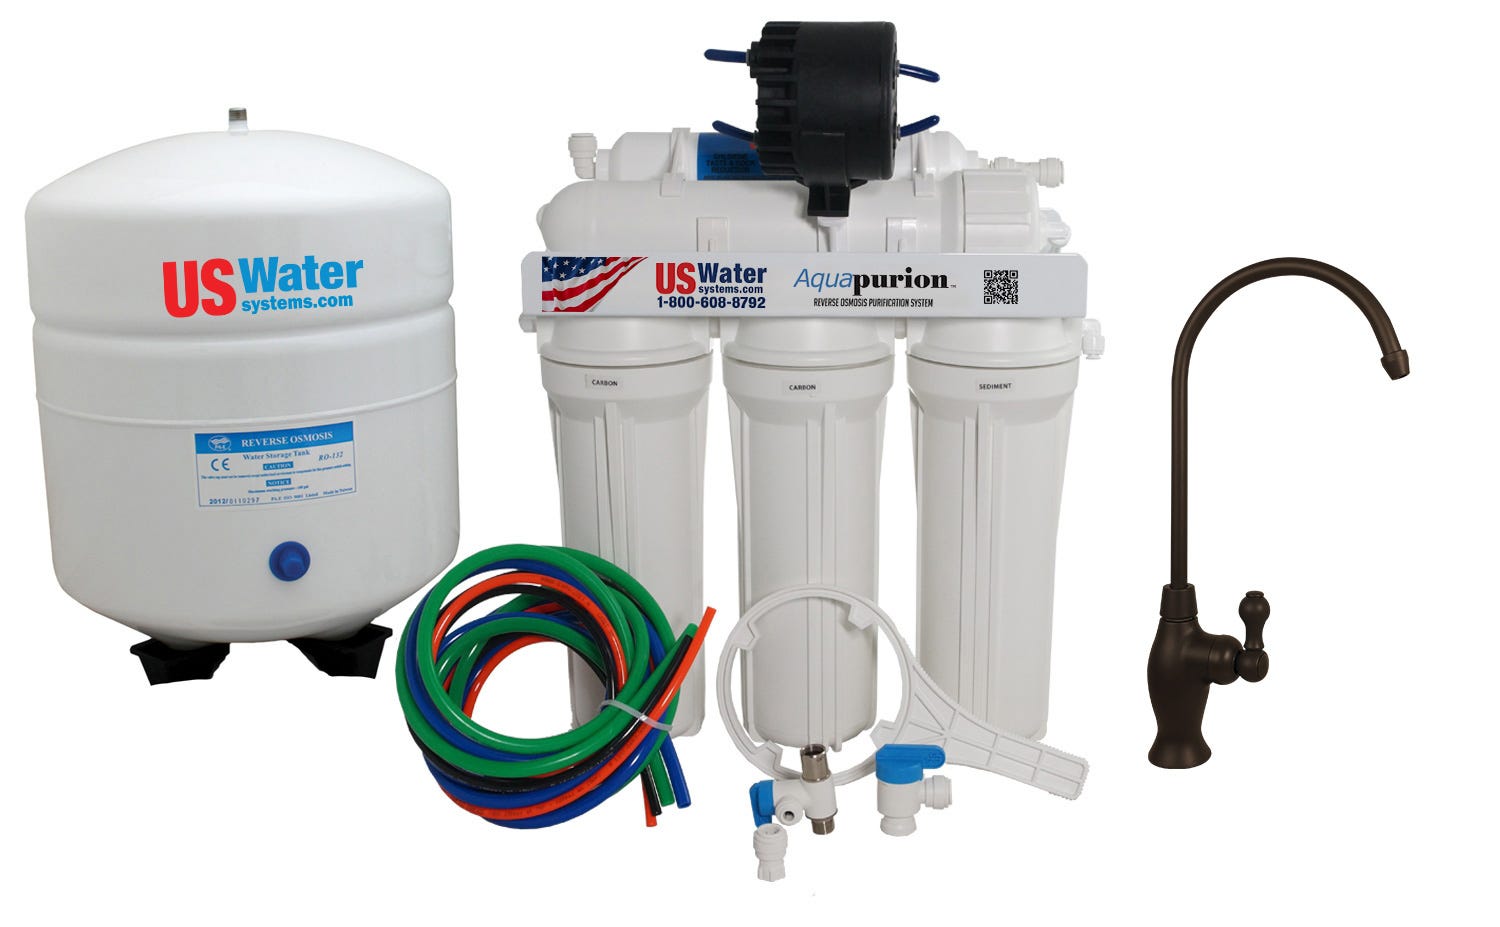 US Water Aquapurion 5-Stage Reverse Osmosis System With Enhanced Fluoride Removal